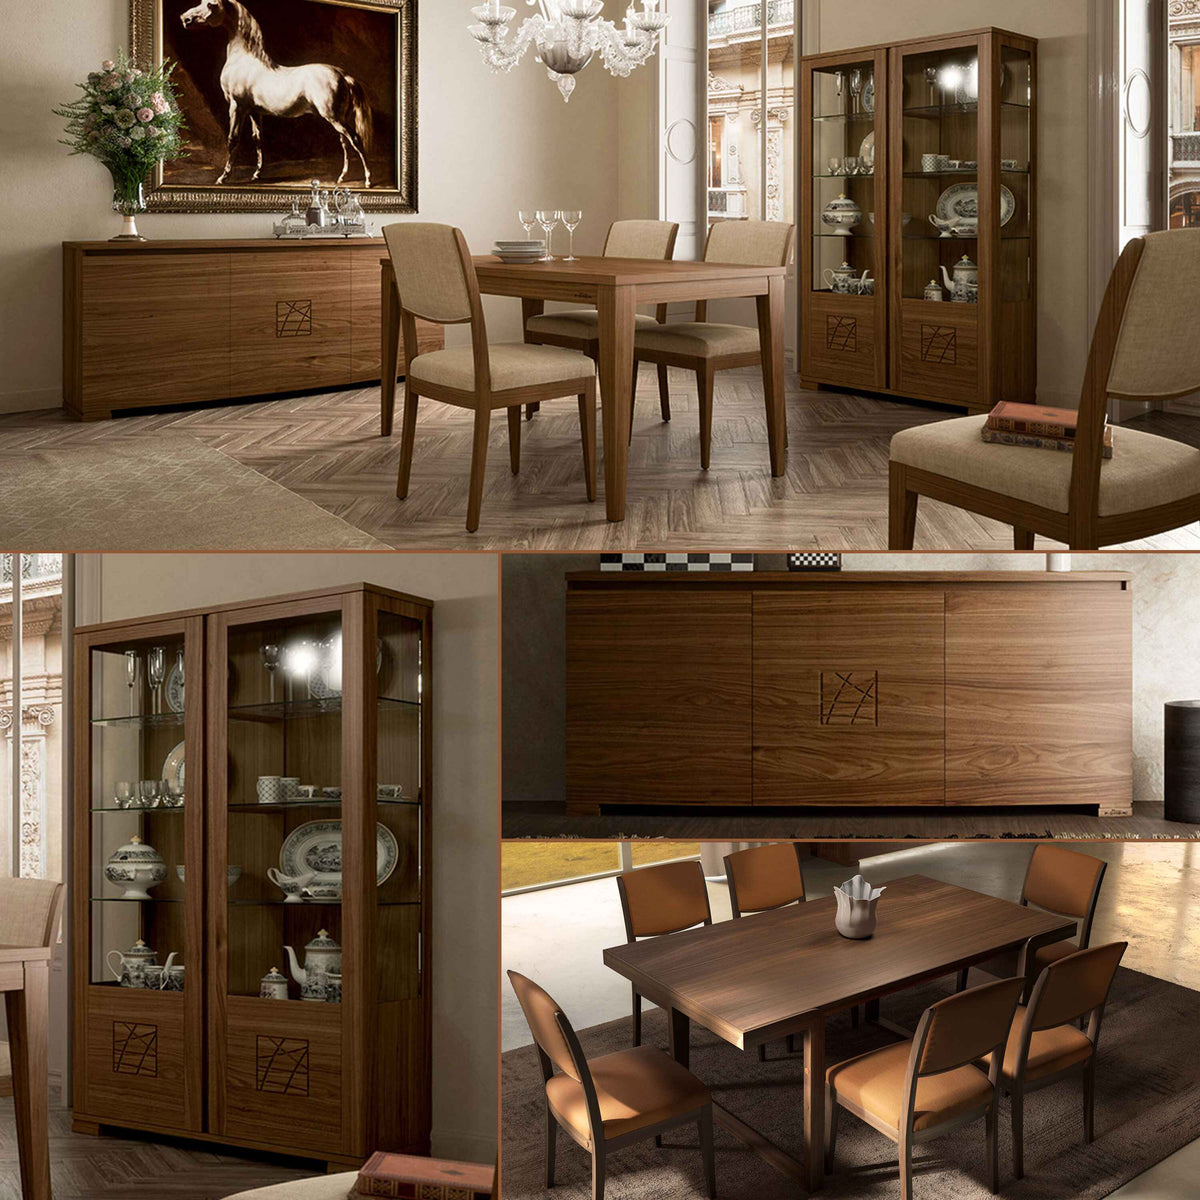 Complete Modern Dining Room in Walnut Wood with Carving from the Modigliani Piombini Collection